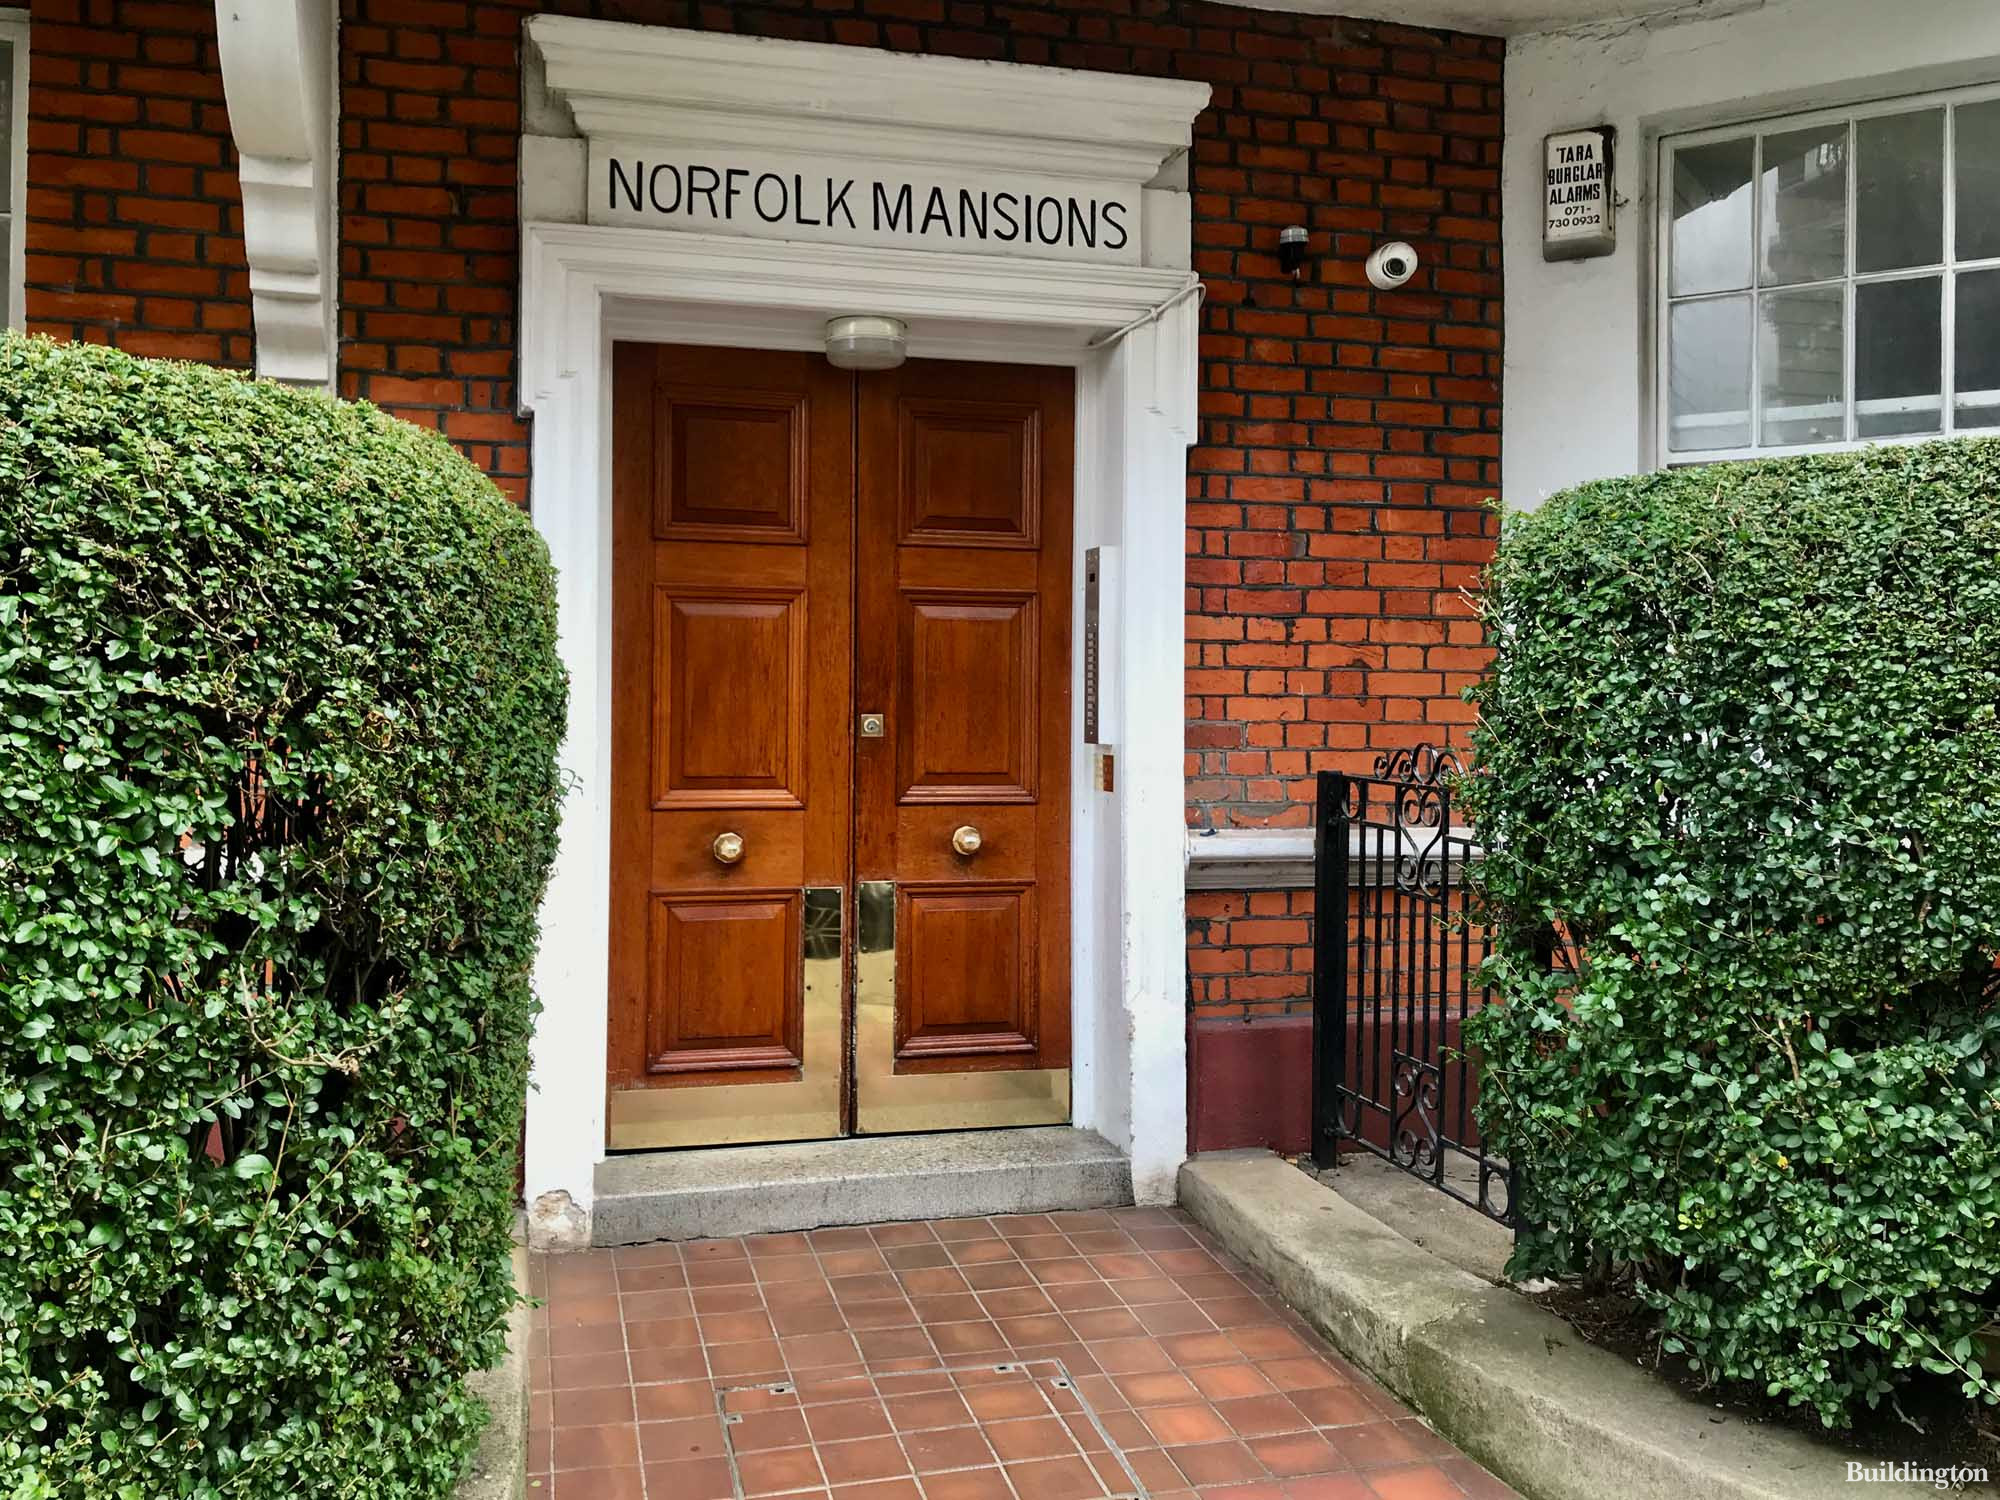 One of the entrances to Norfolk Mansions on Kassala Road in Battersea, London SW11.